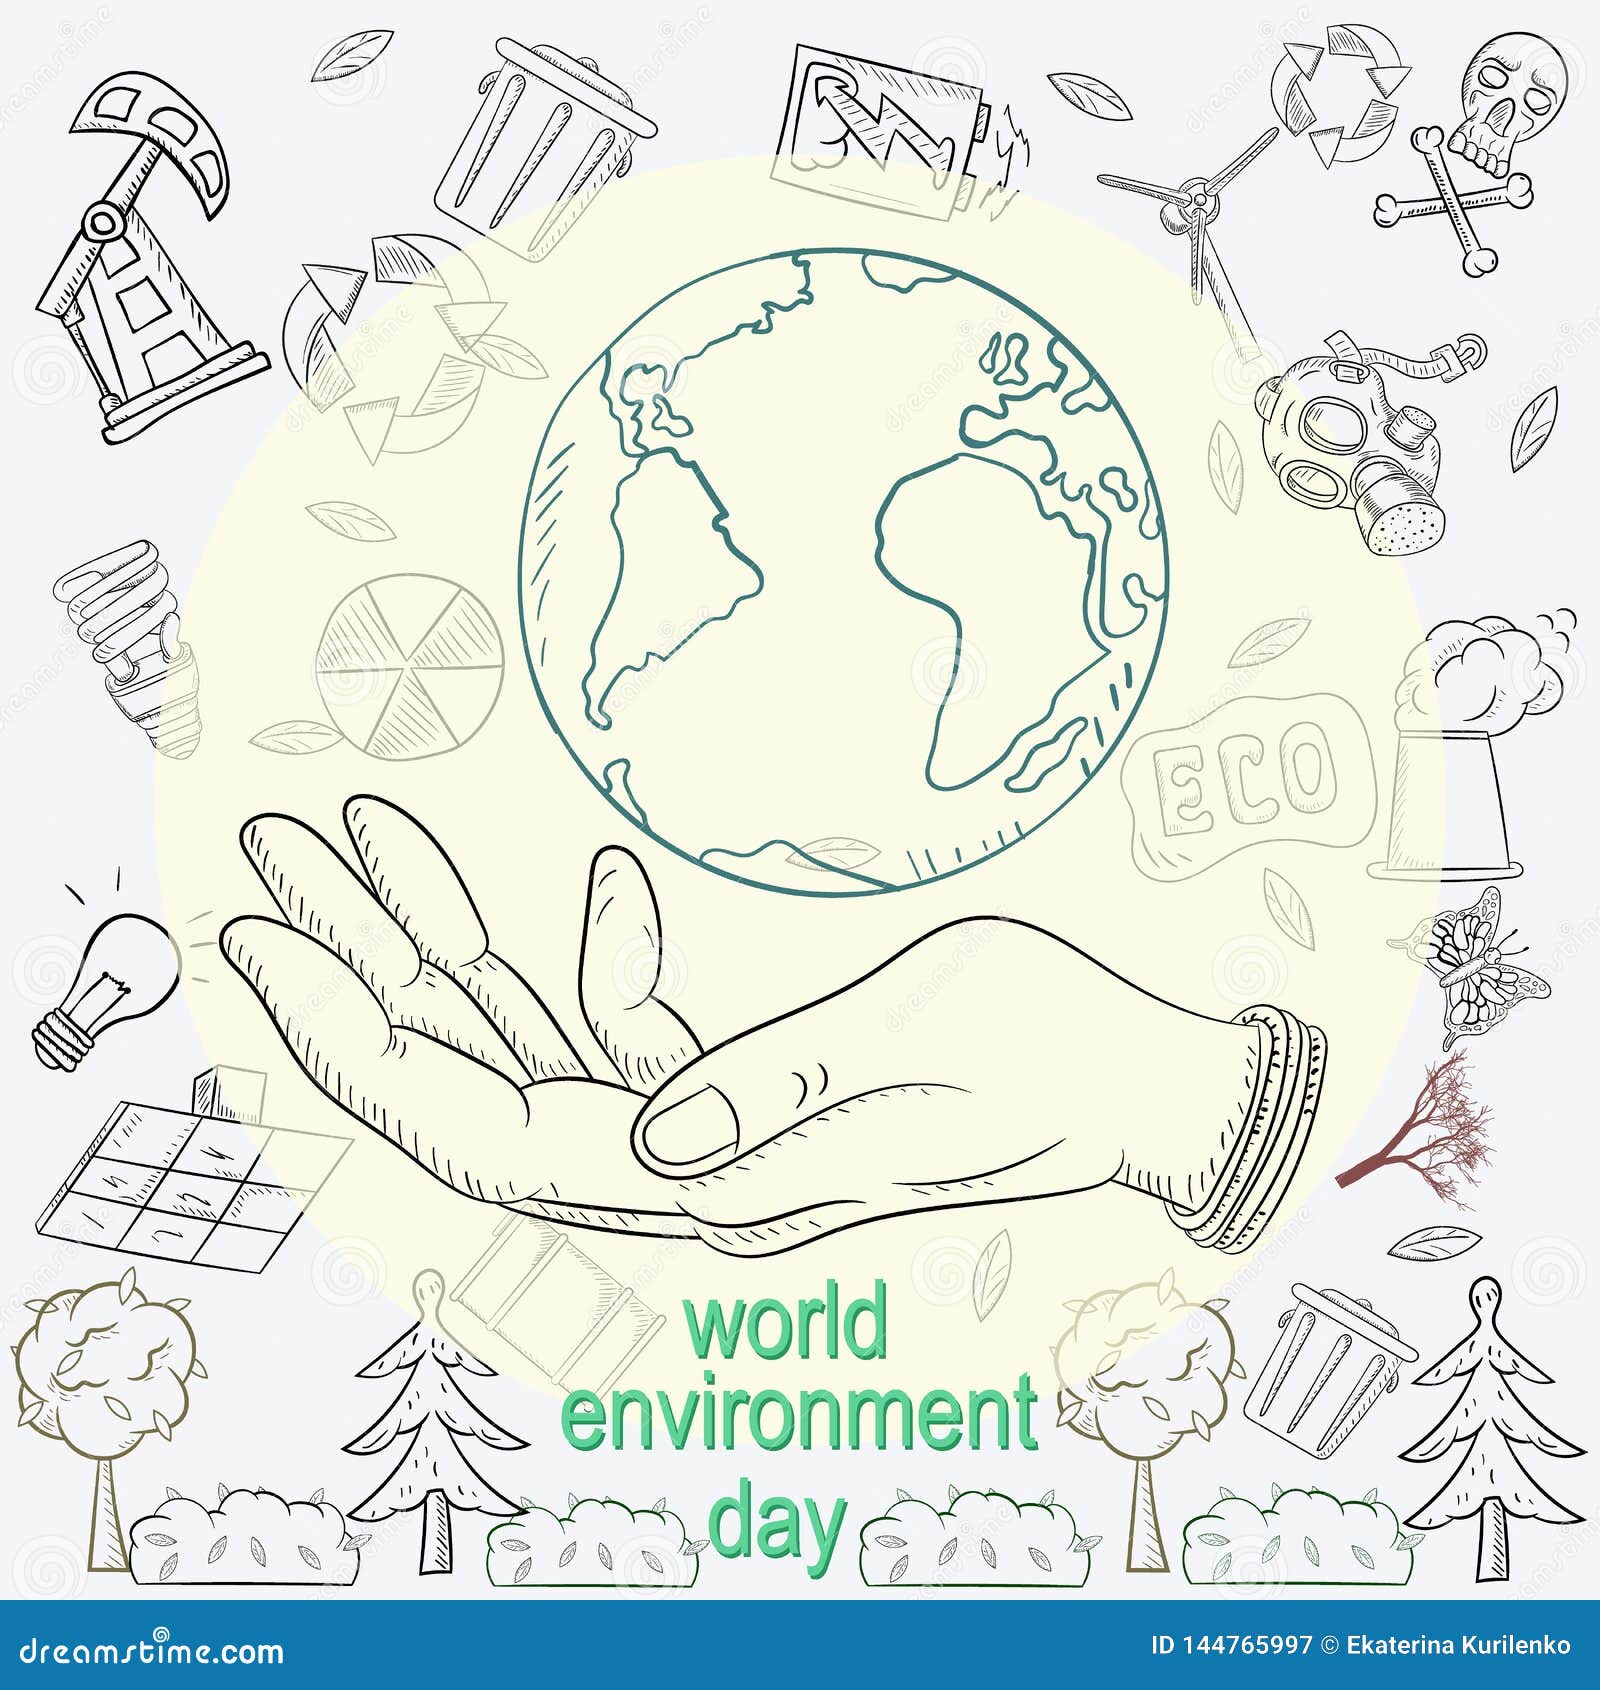 World Environment Day Drawing For Beginners /Save Nature, Earth drawing  poster chart for competition - YouTube